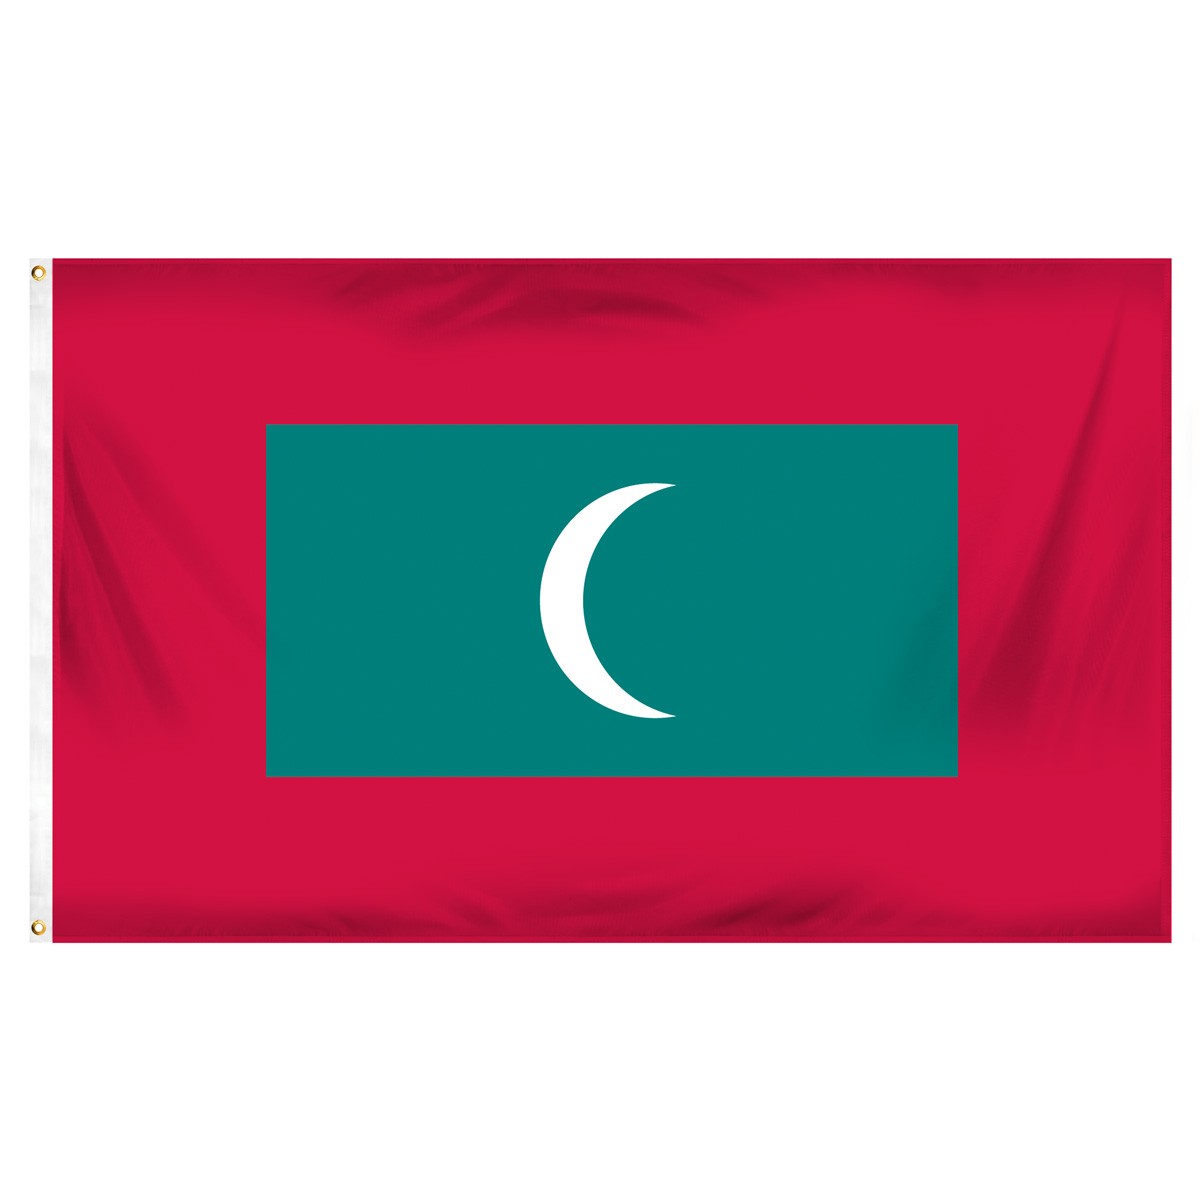 Maldives Building Pennants and Flags